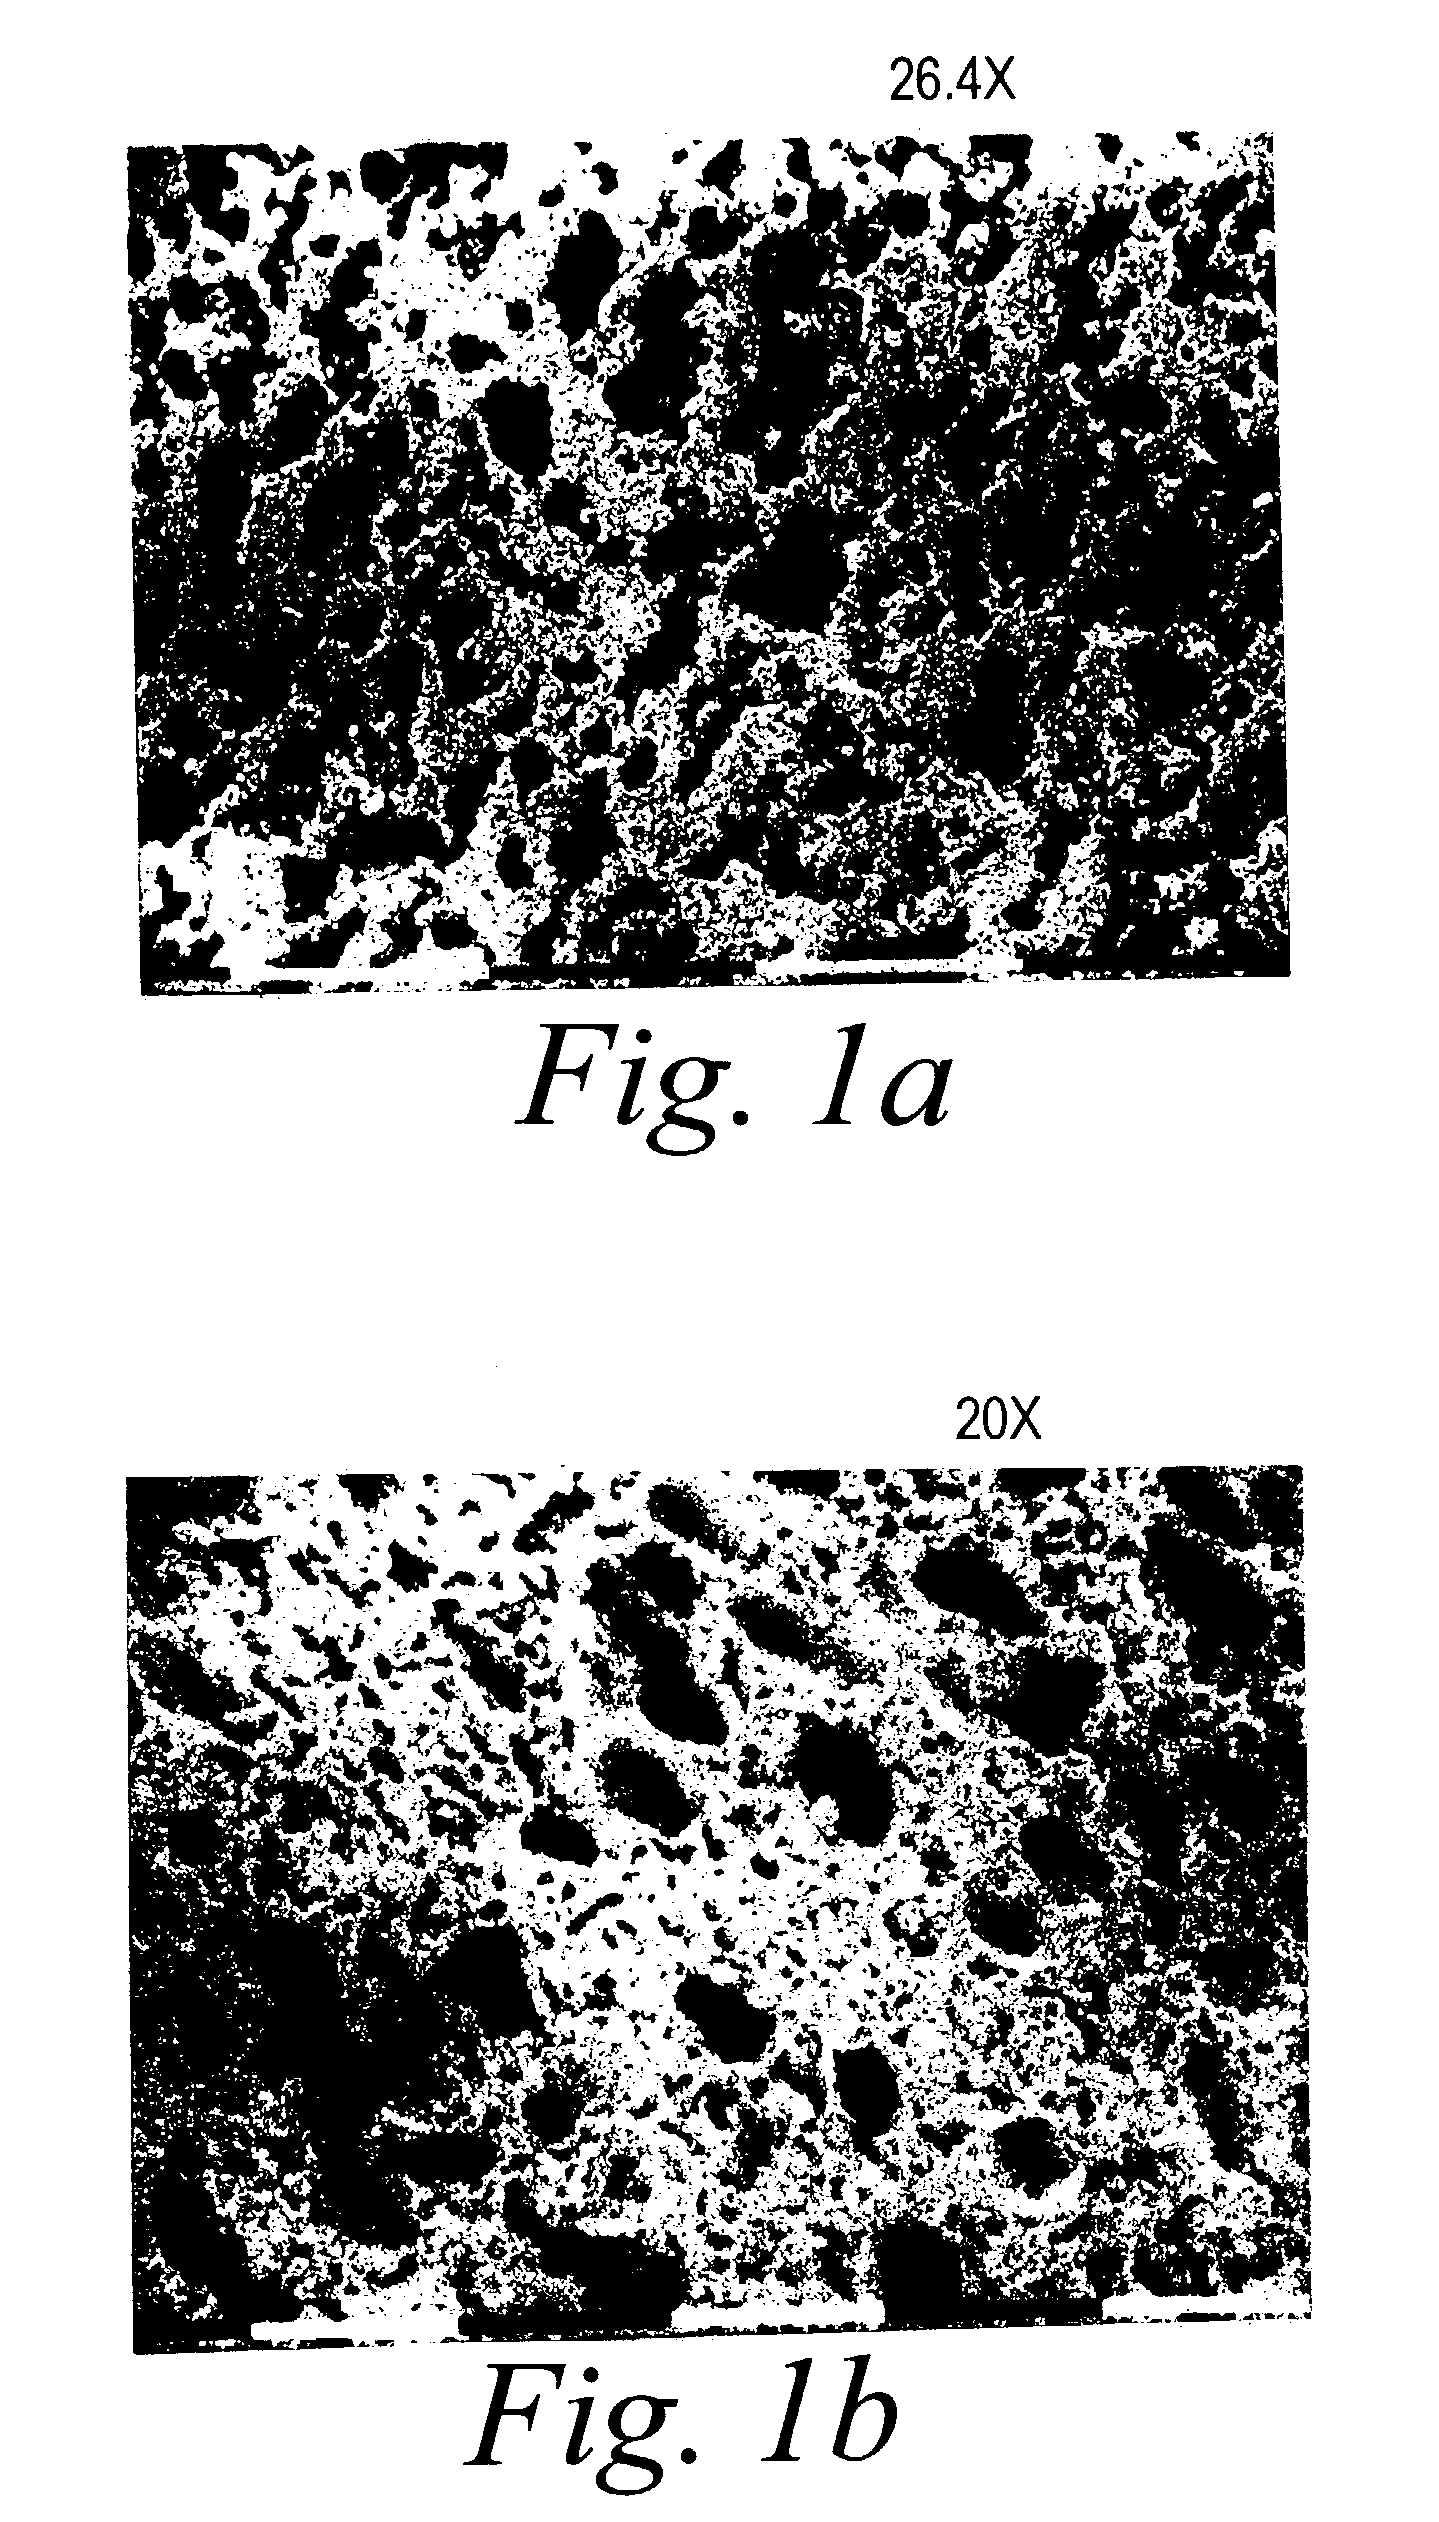 Calcium phosphate bone replacement materials and methods of use thereof